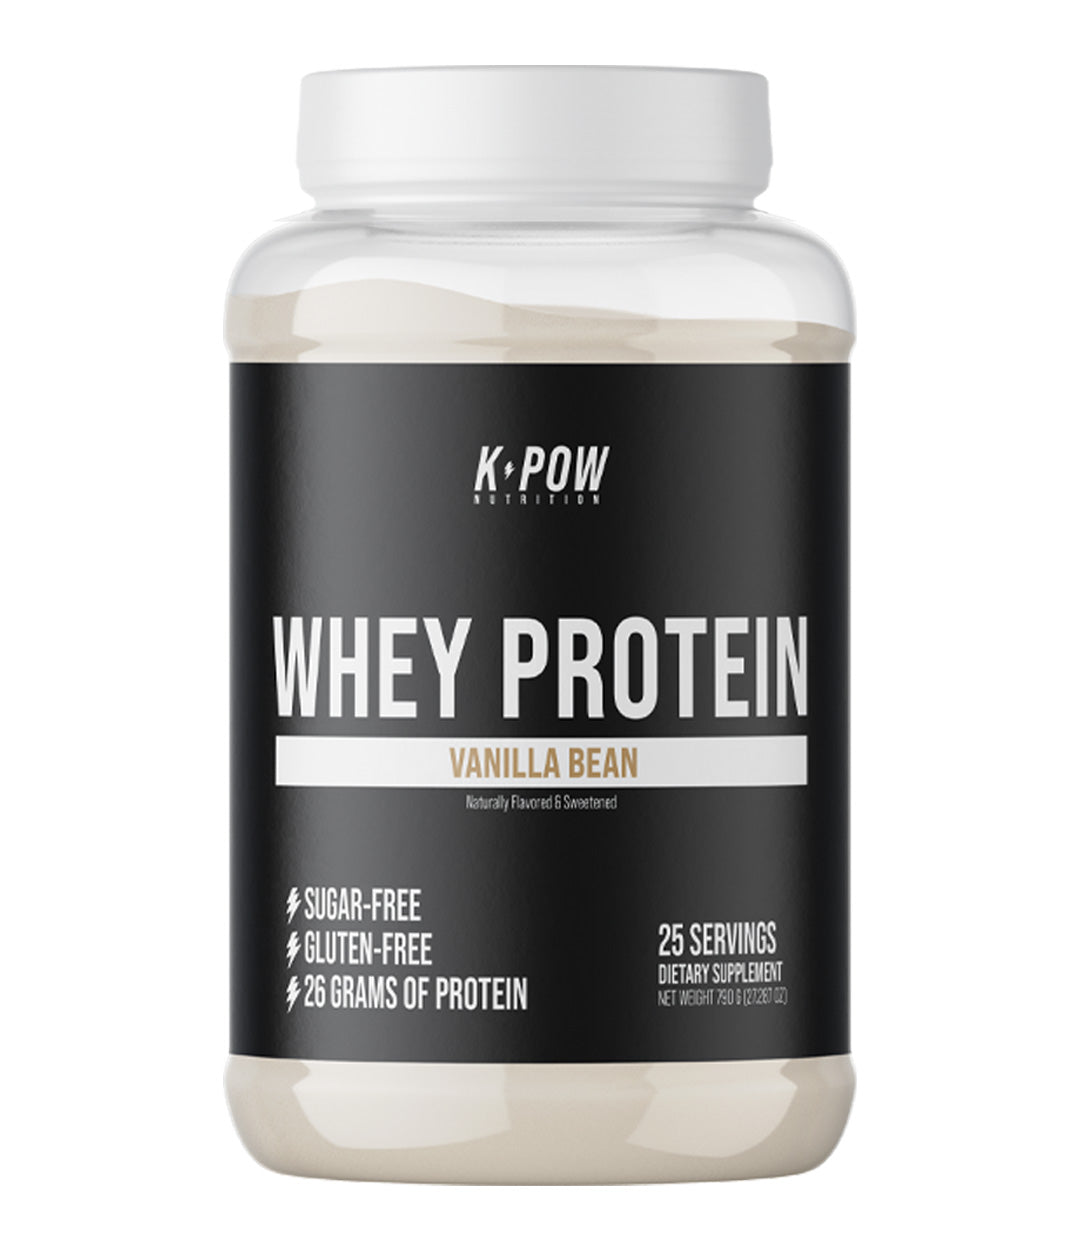 Whey Protein // All Natural Protein Powder